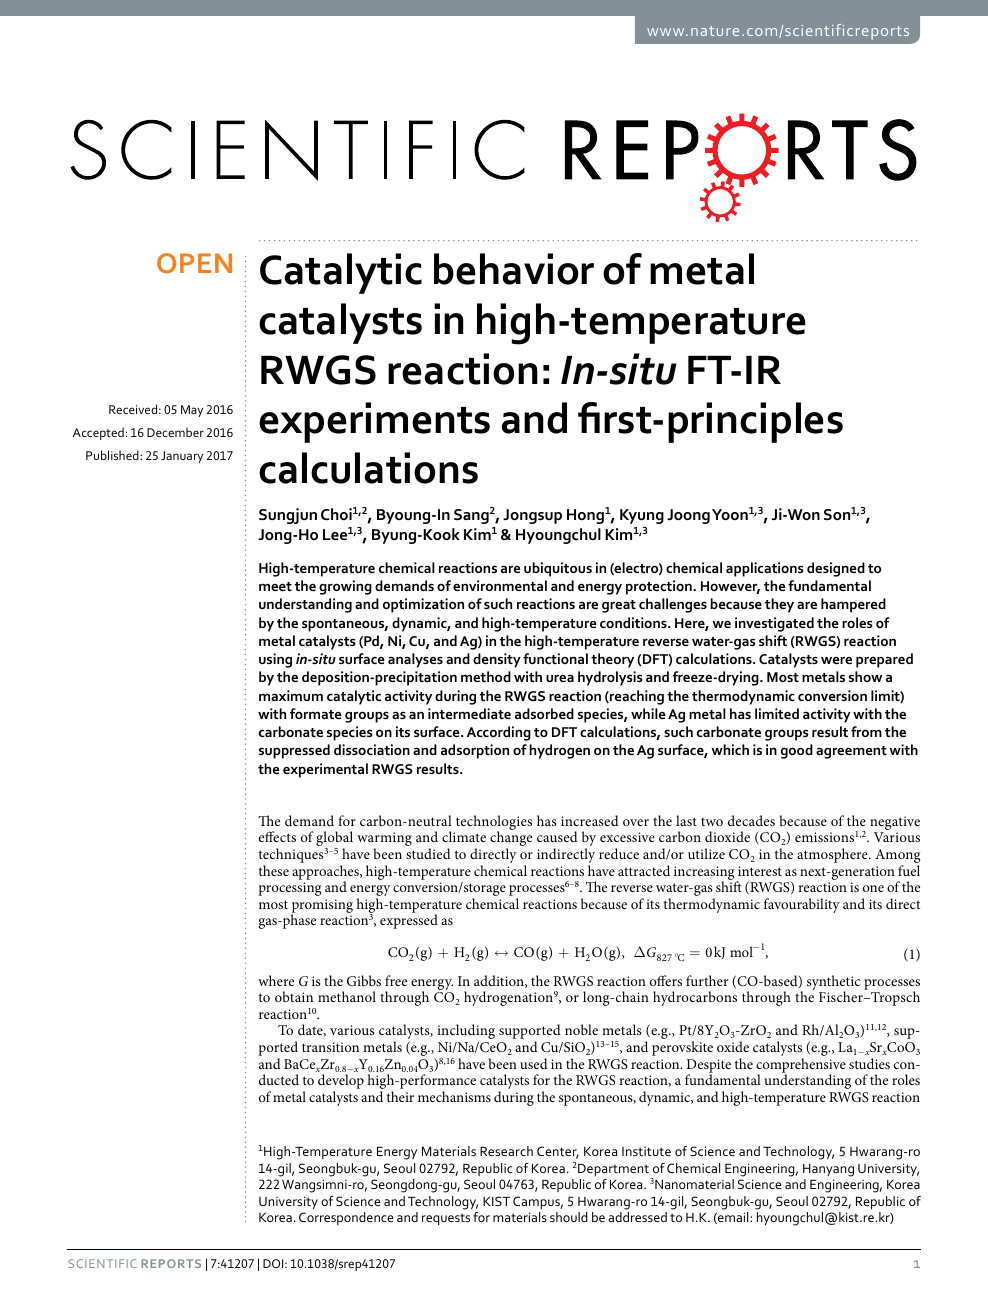 Catalytic behavior of metal catalysts in high-temperature RWGS reaction: In-situ FT-IR experiments and first-principles – topic of research paper in Chemical sciences. Download scholarly article and read for free on